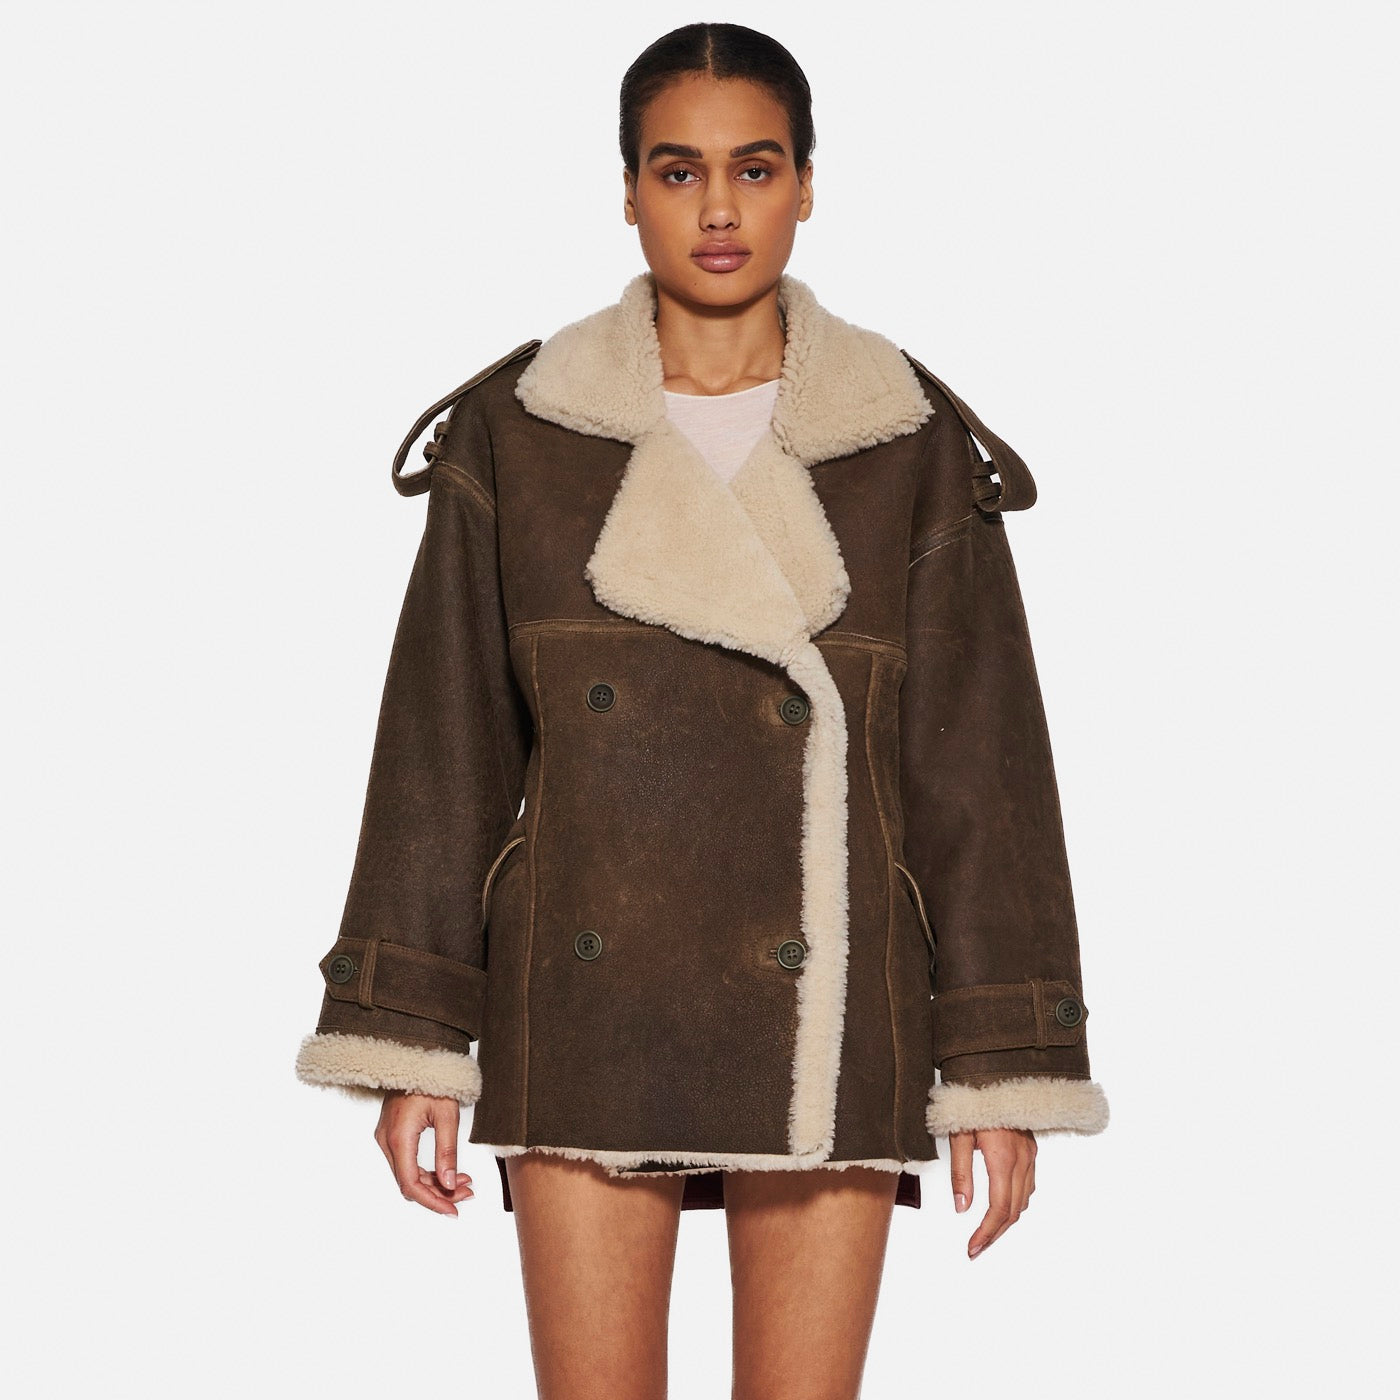 GIACCA IN SHEARLING - ARMY